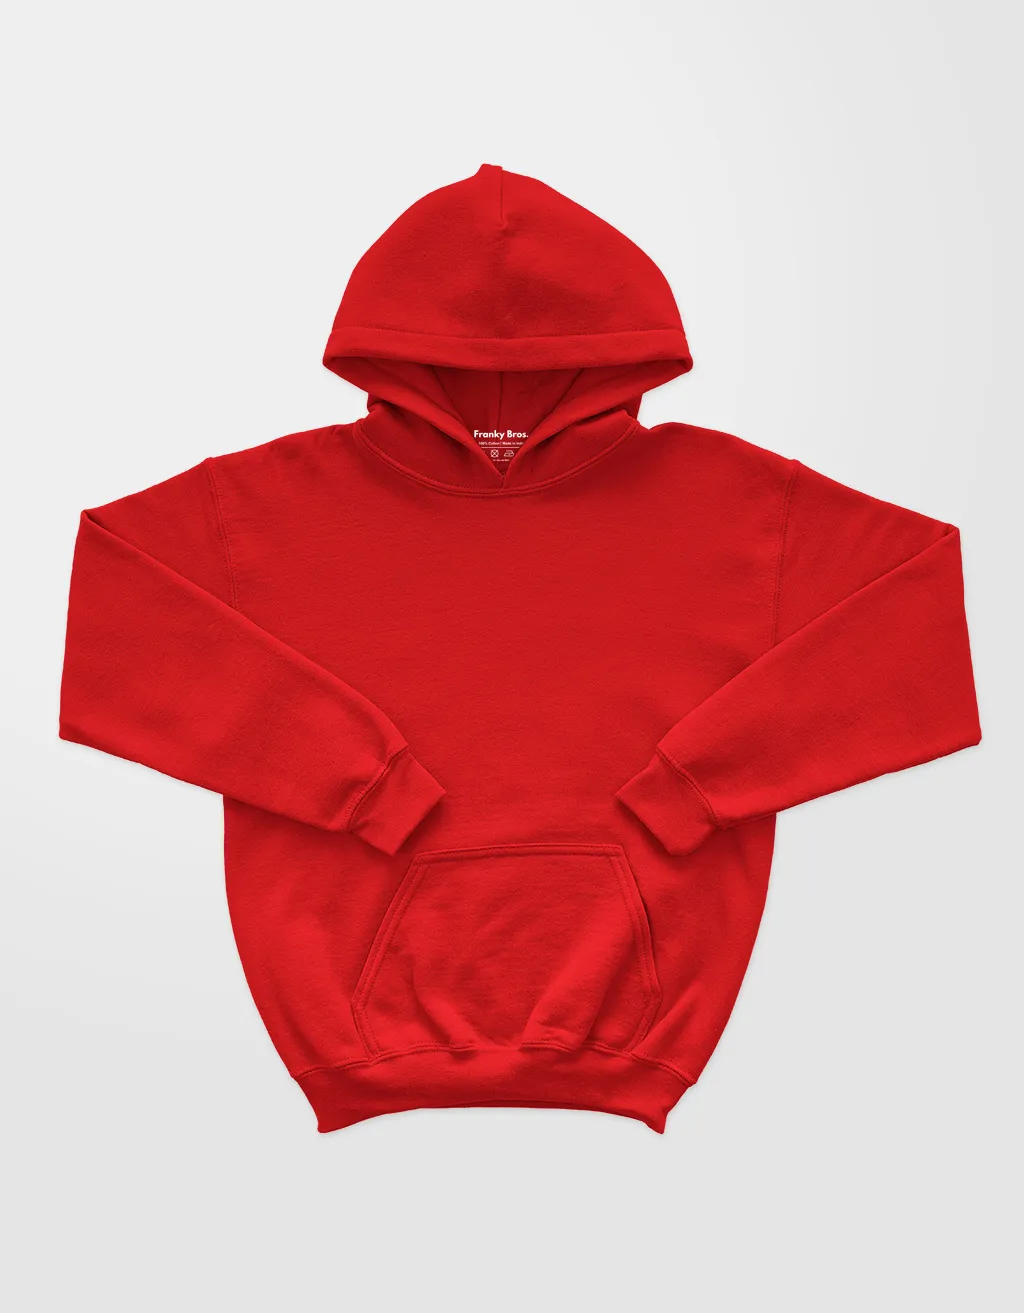 kids red hoodie and sweatshirt for girls and boys online india